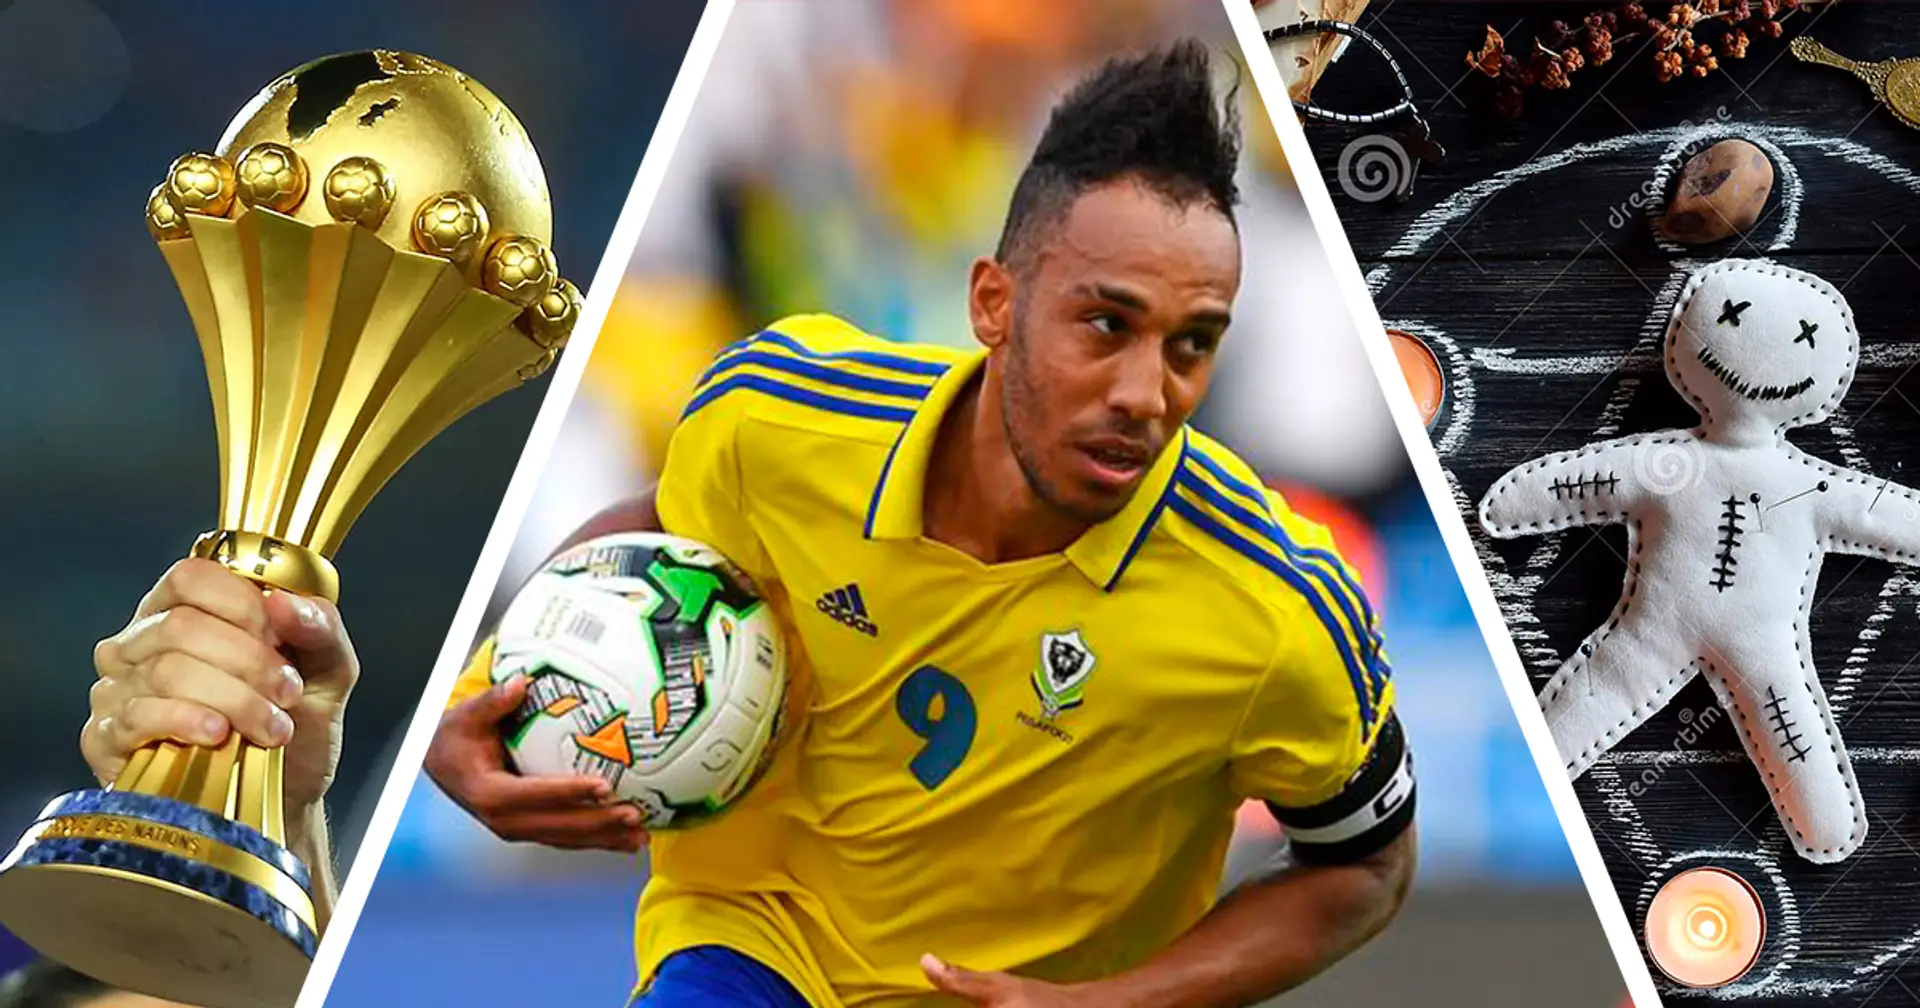 Gabon announces the usage of sorcery to help lead them to AFCON glory